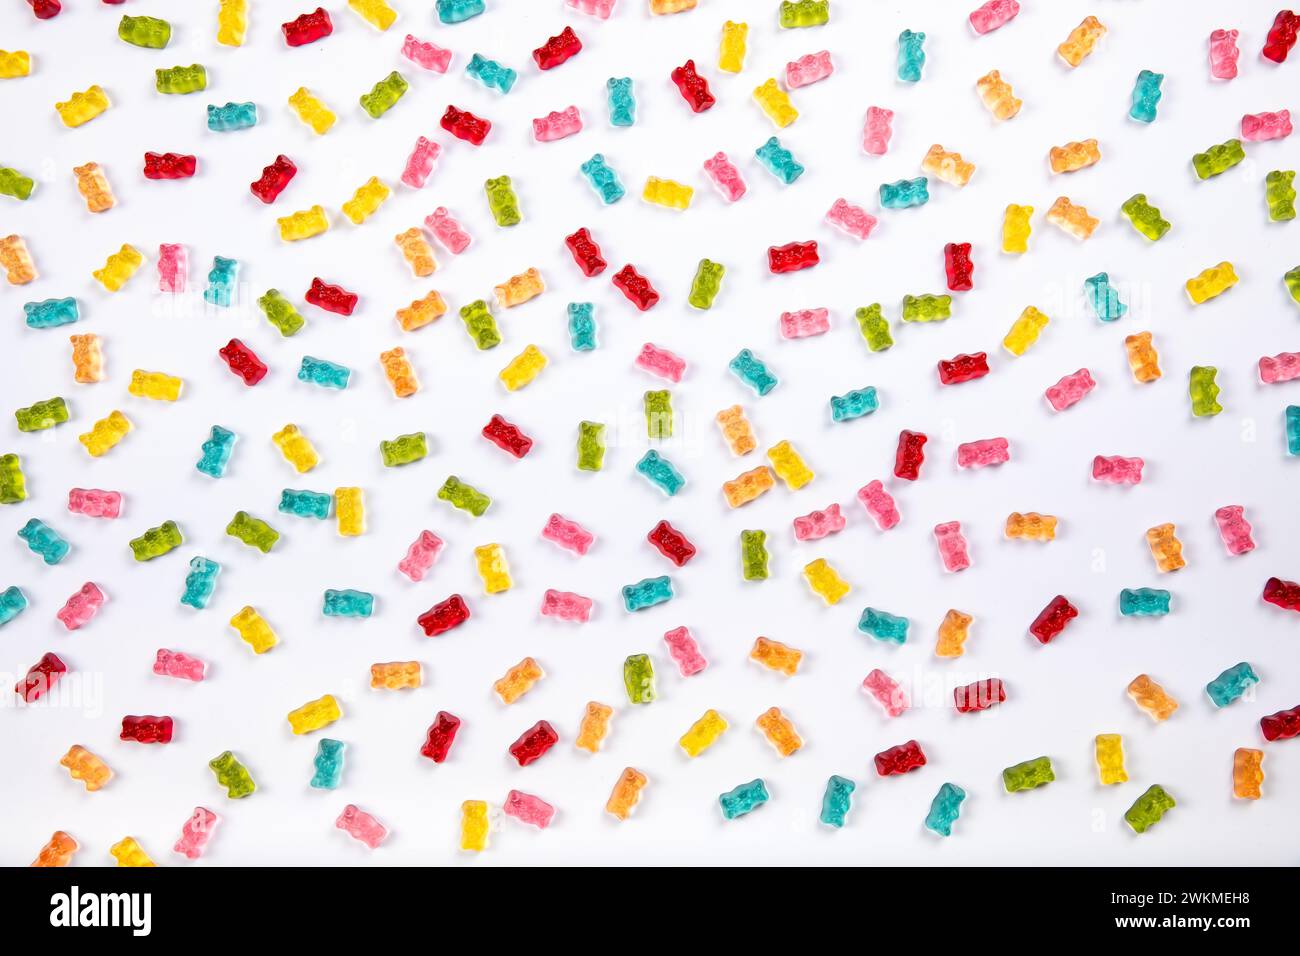 Colorful Gummy Bears Texture Background - Sweet Candy Delights on White Background Stock Photo